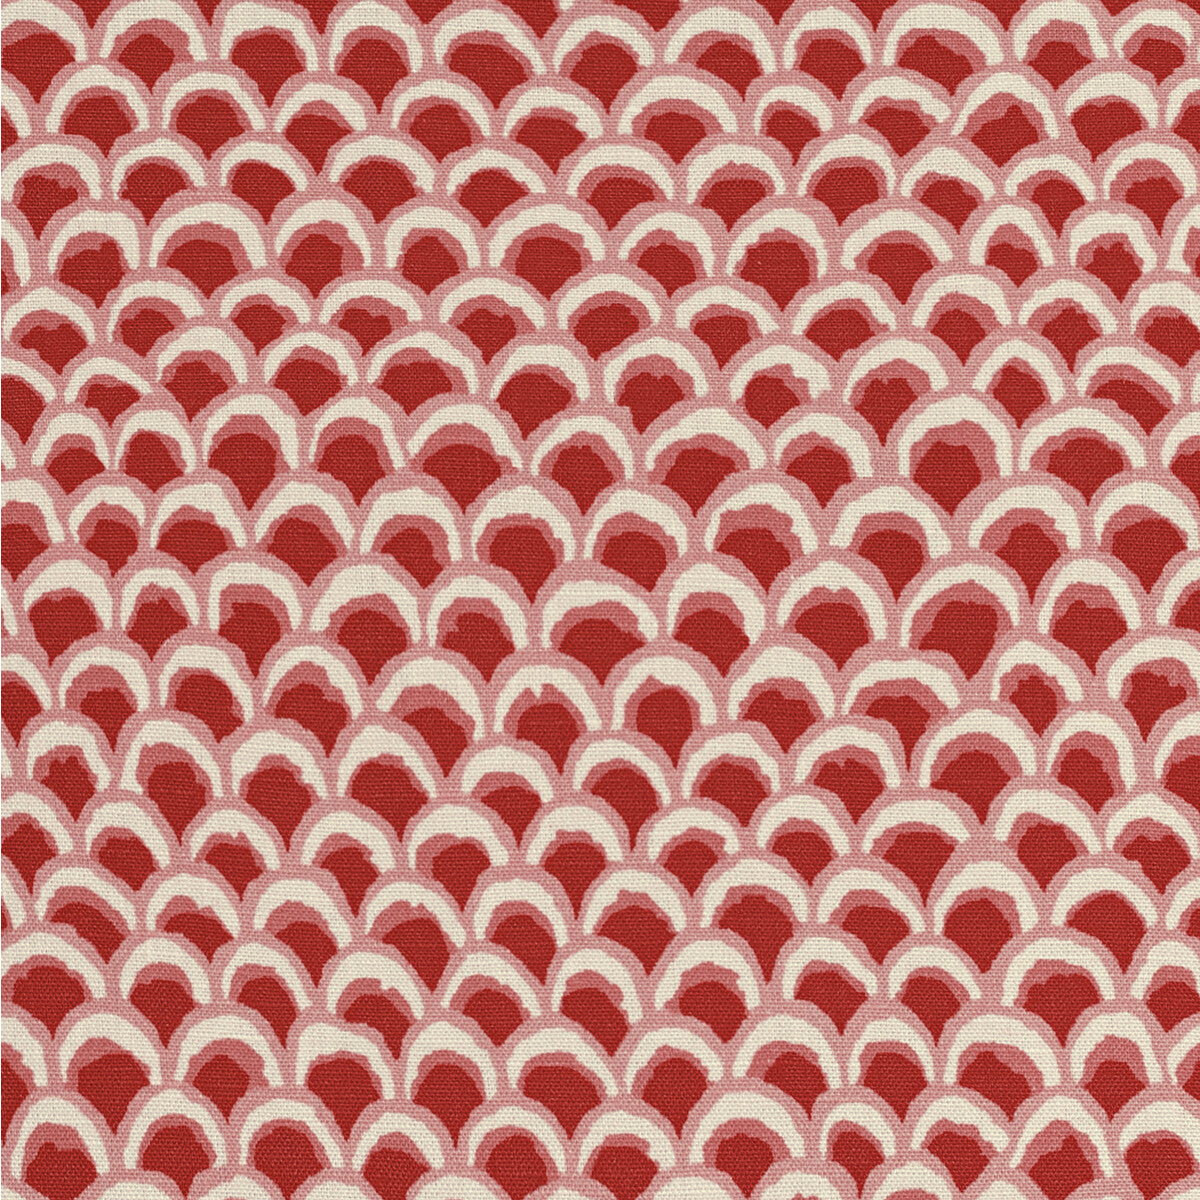 Pave II Print fabric in red color - pattern 8020126.19.0 - by Brunschwig &amp; Fils in the Louverne collection